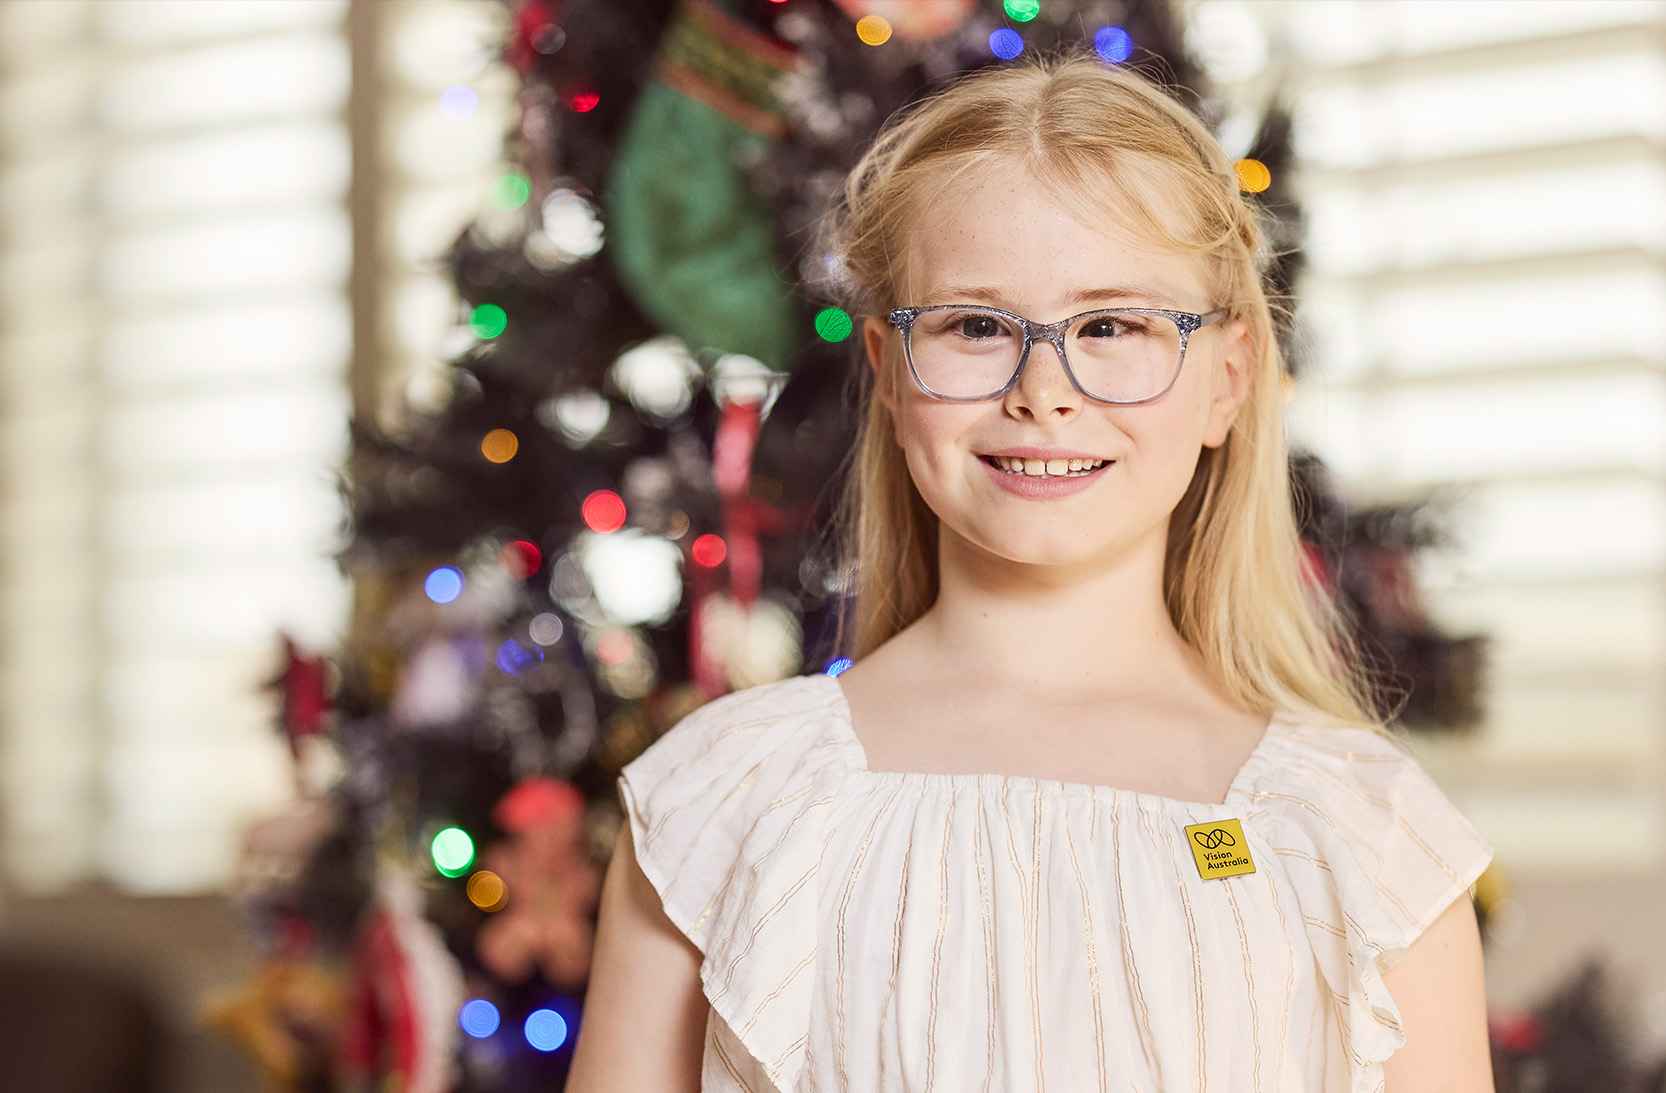 Young girl with blond hair, wearing glasses, stands in front of a Christmas tree